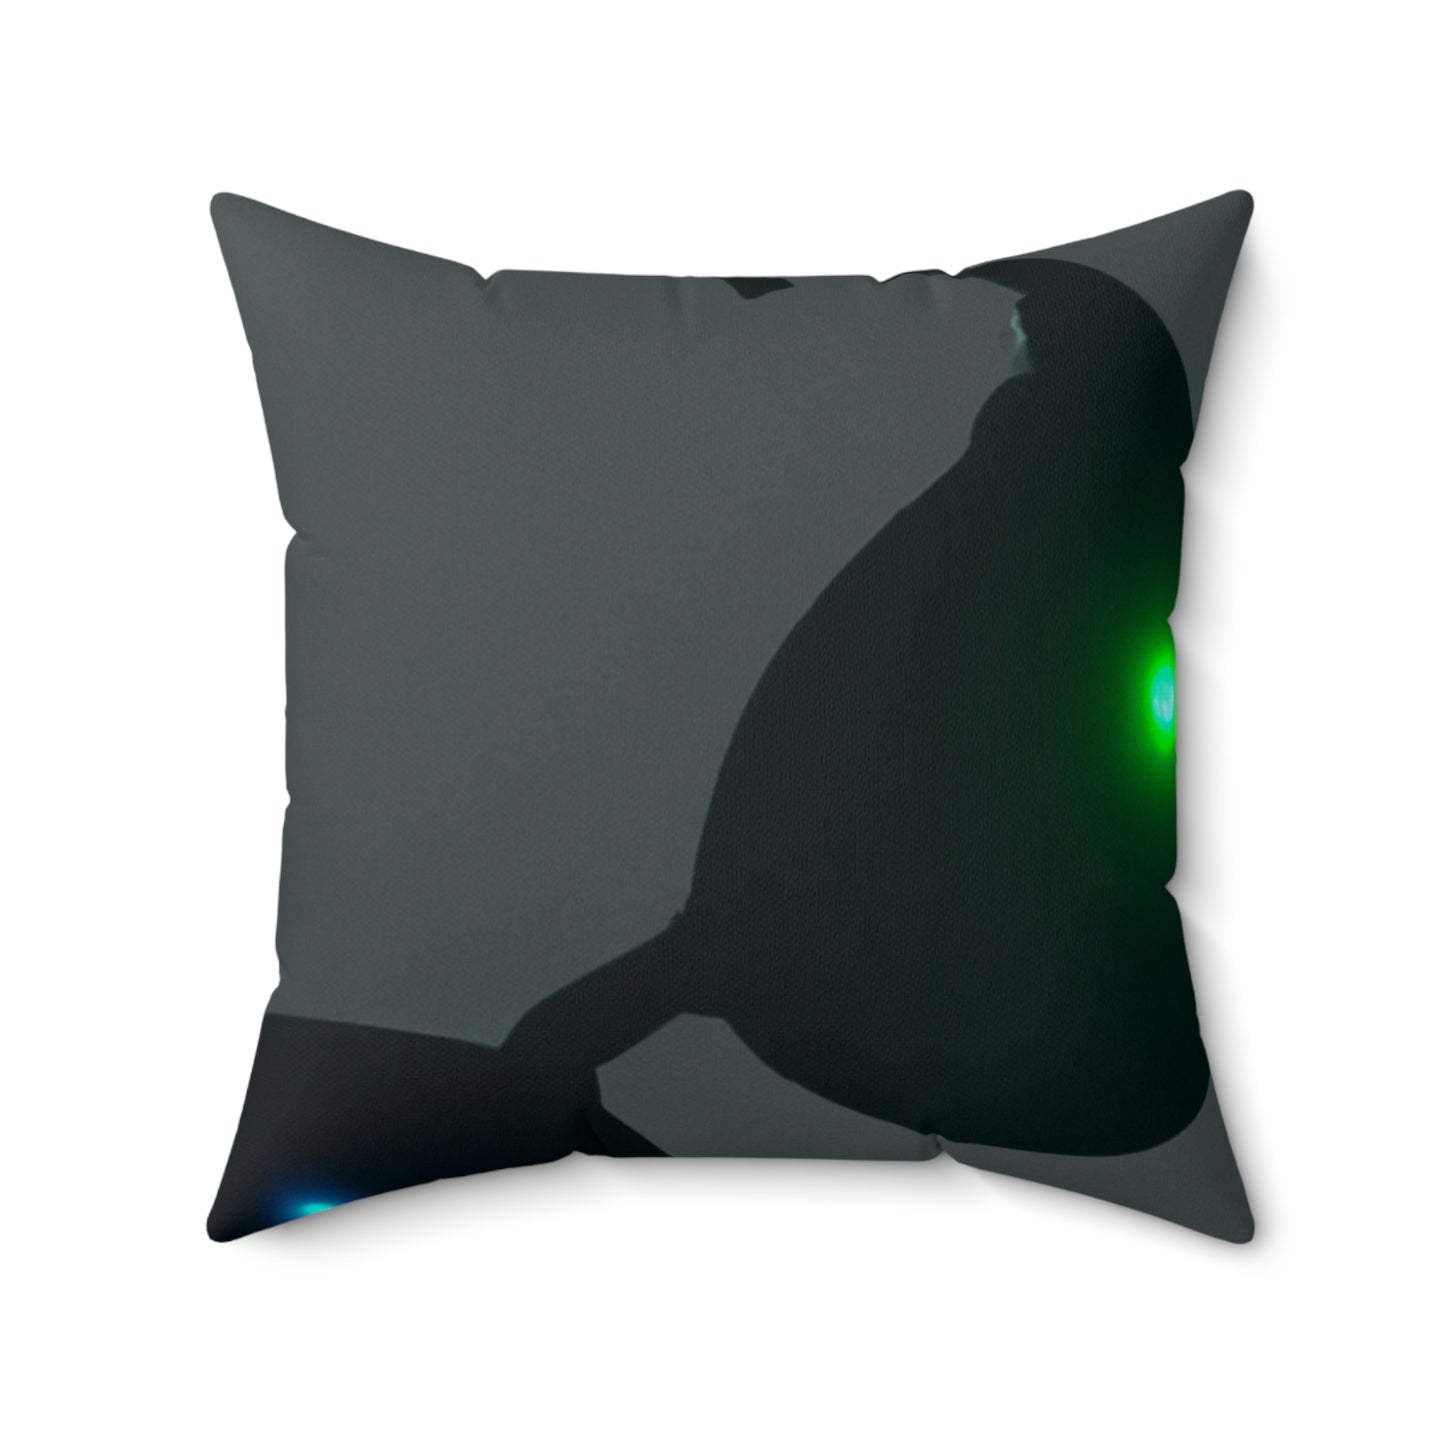 "Shadow of the Invaders" - The Alien Square Pillow